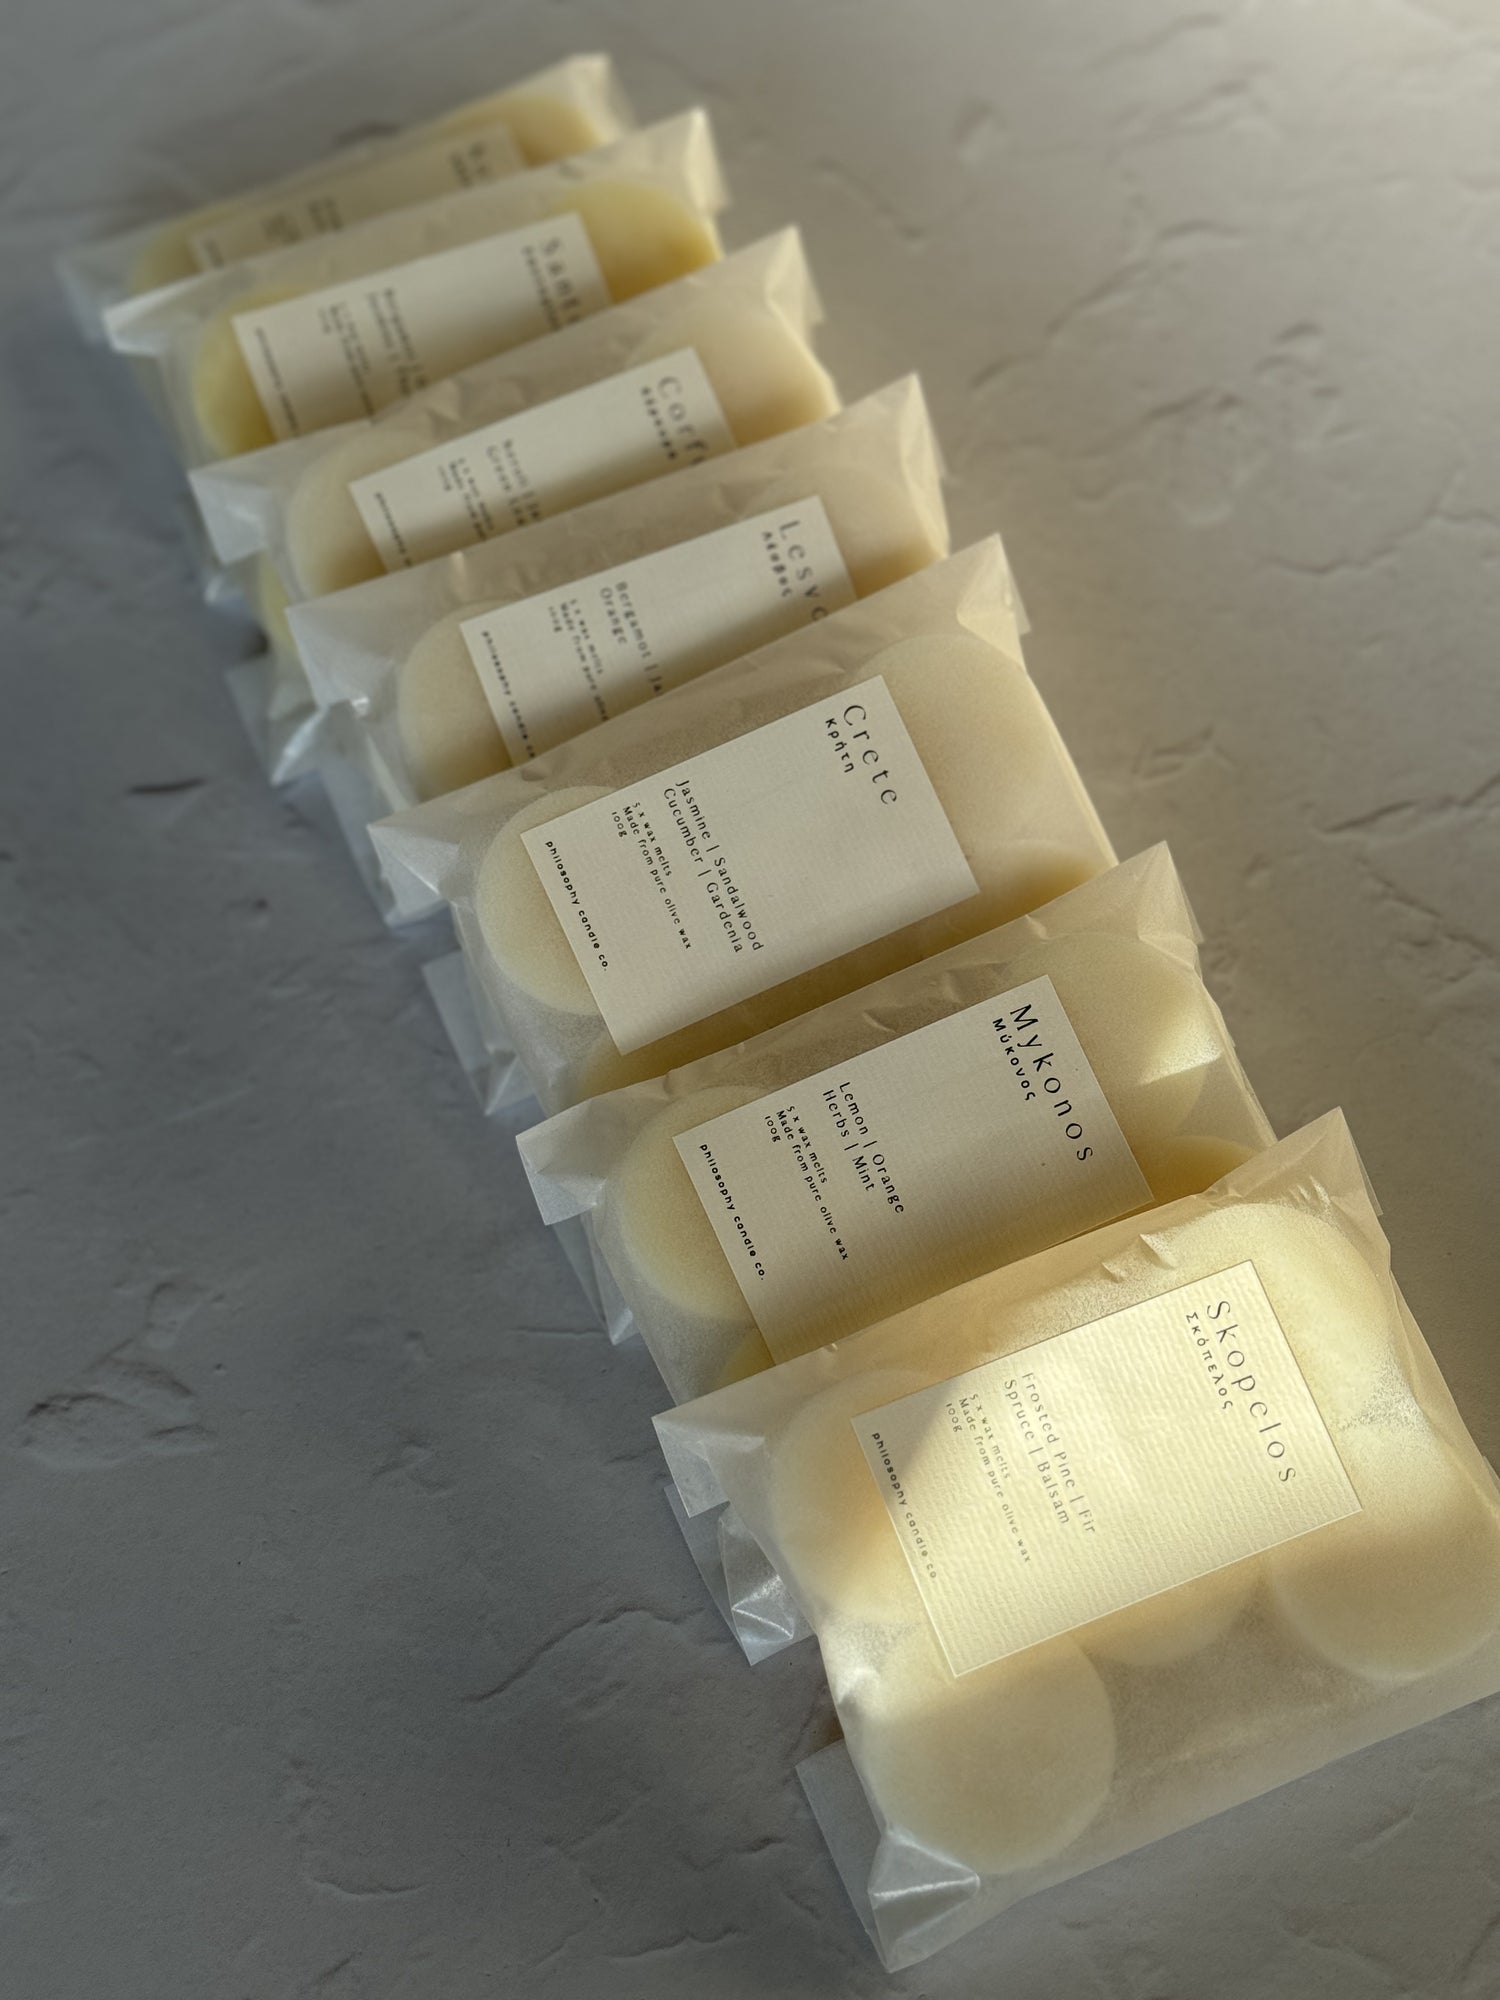 lesvos wax melts - Philosophy Candle Co